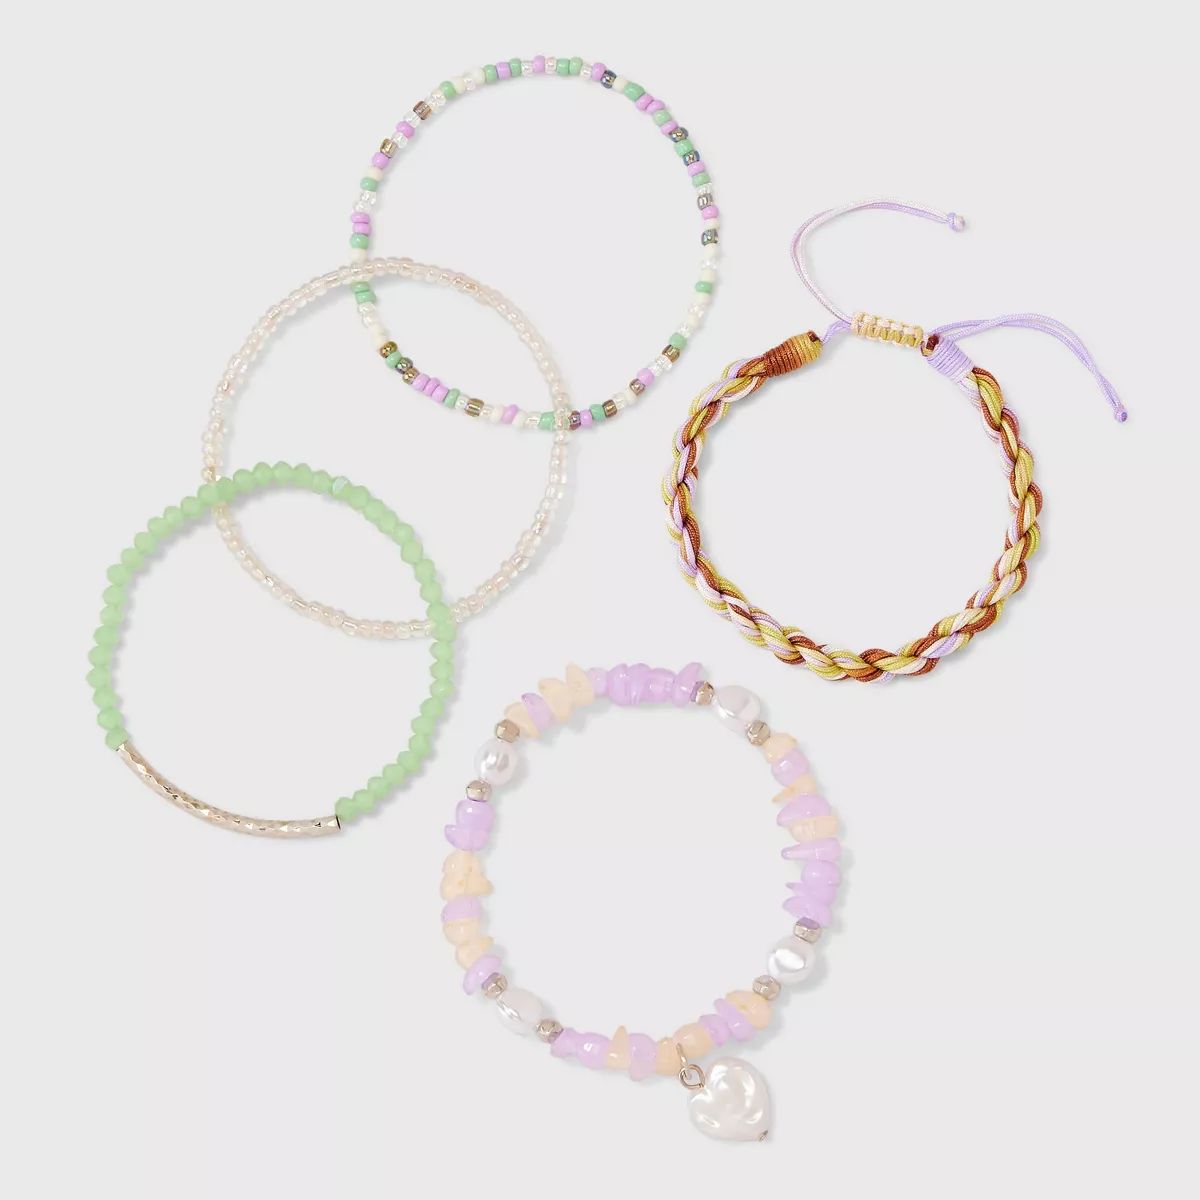 Mixed Bead and Simulated Pearl Heart Stretch Bracelet Set 5pc - Wild Fable™ Green/Purple | Target